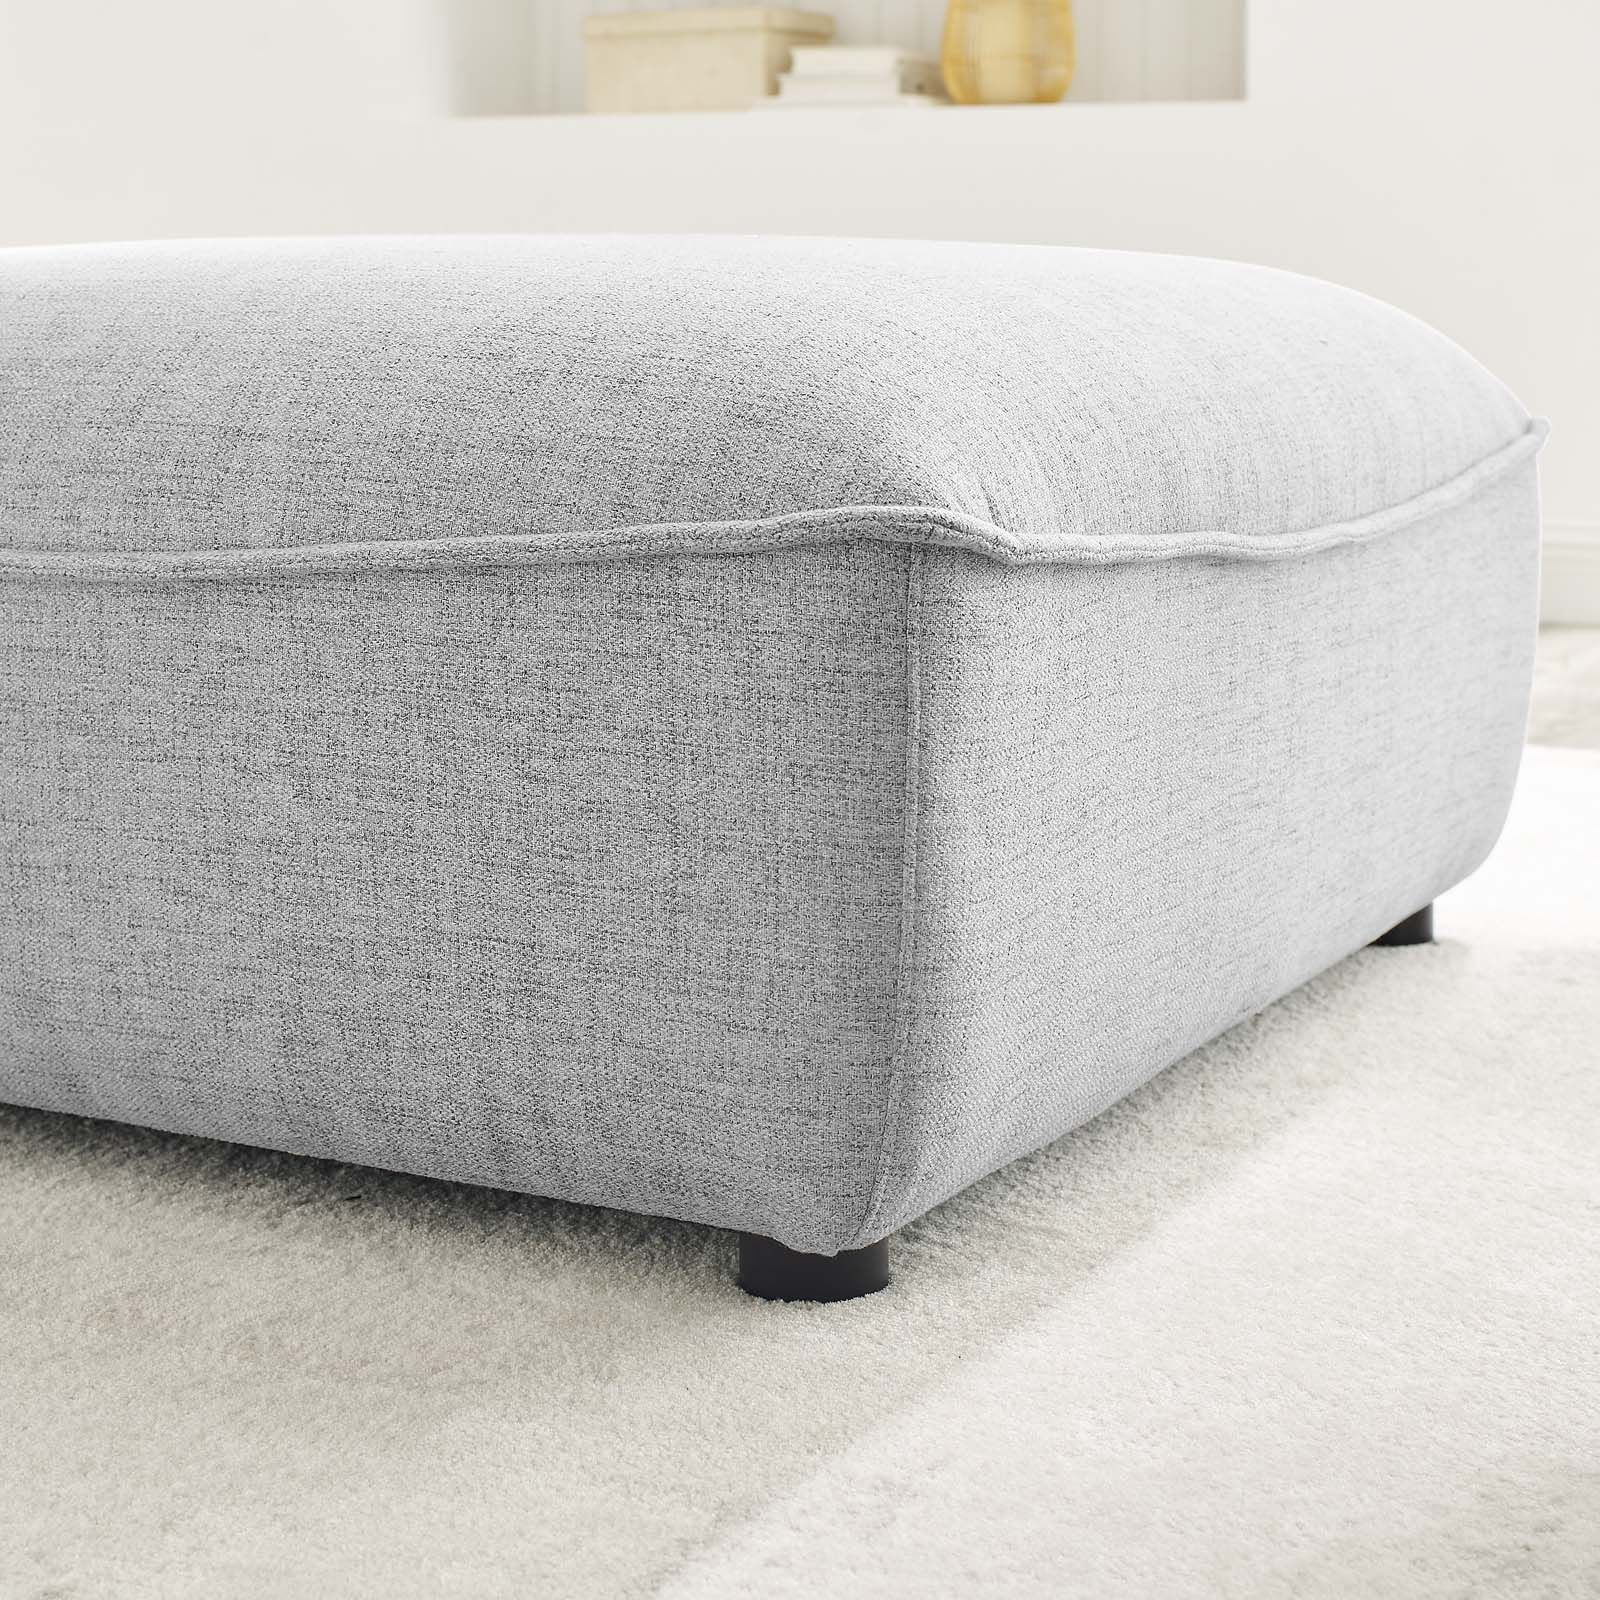 Light Gray Cylinder Pouf Ottomans Regarding Preferred Comprise Sectional Sofa Ottoman Light Gray (View 1 of 10)